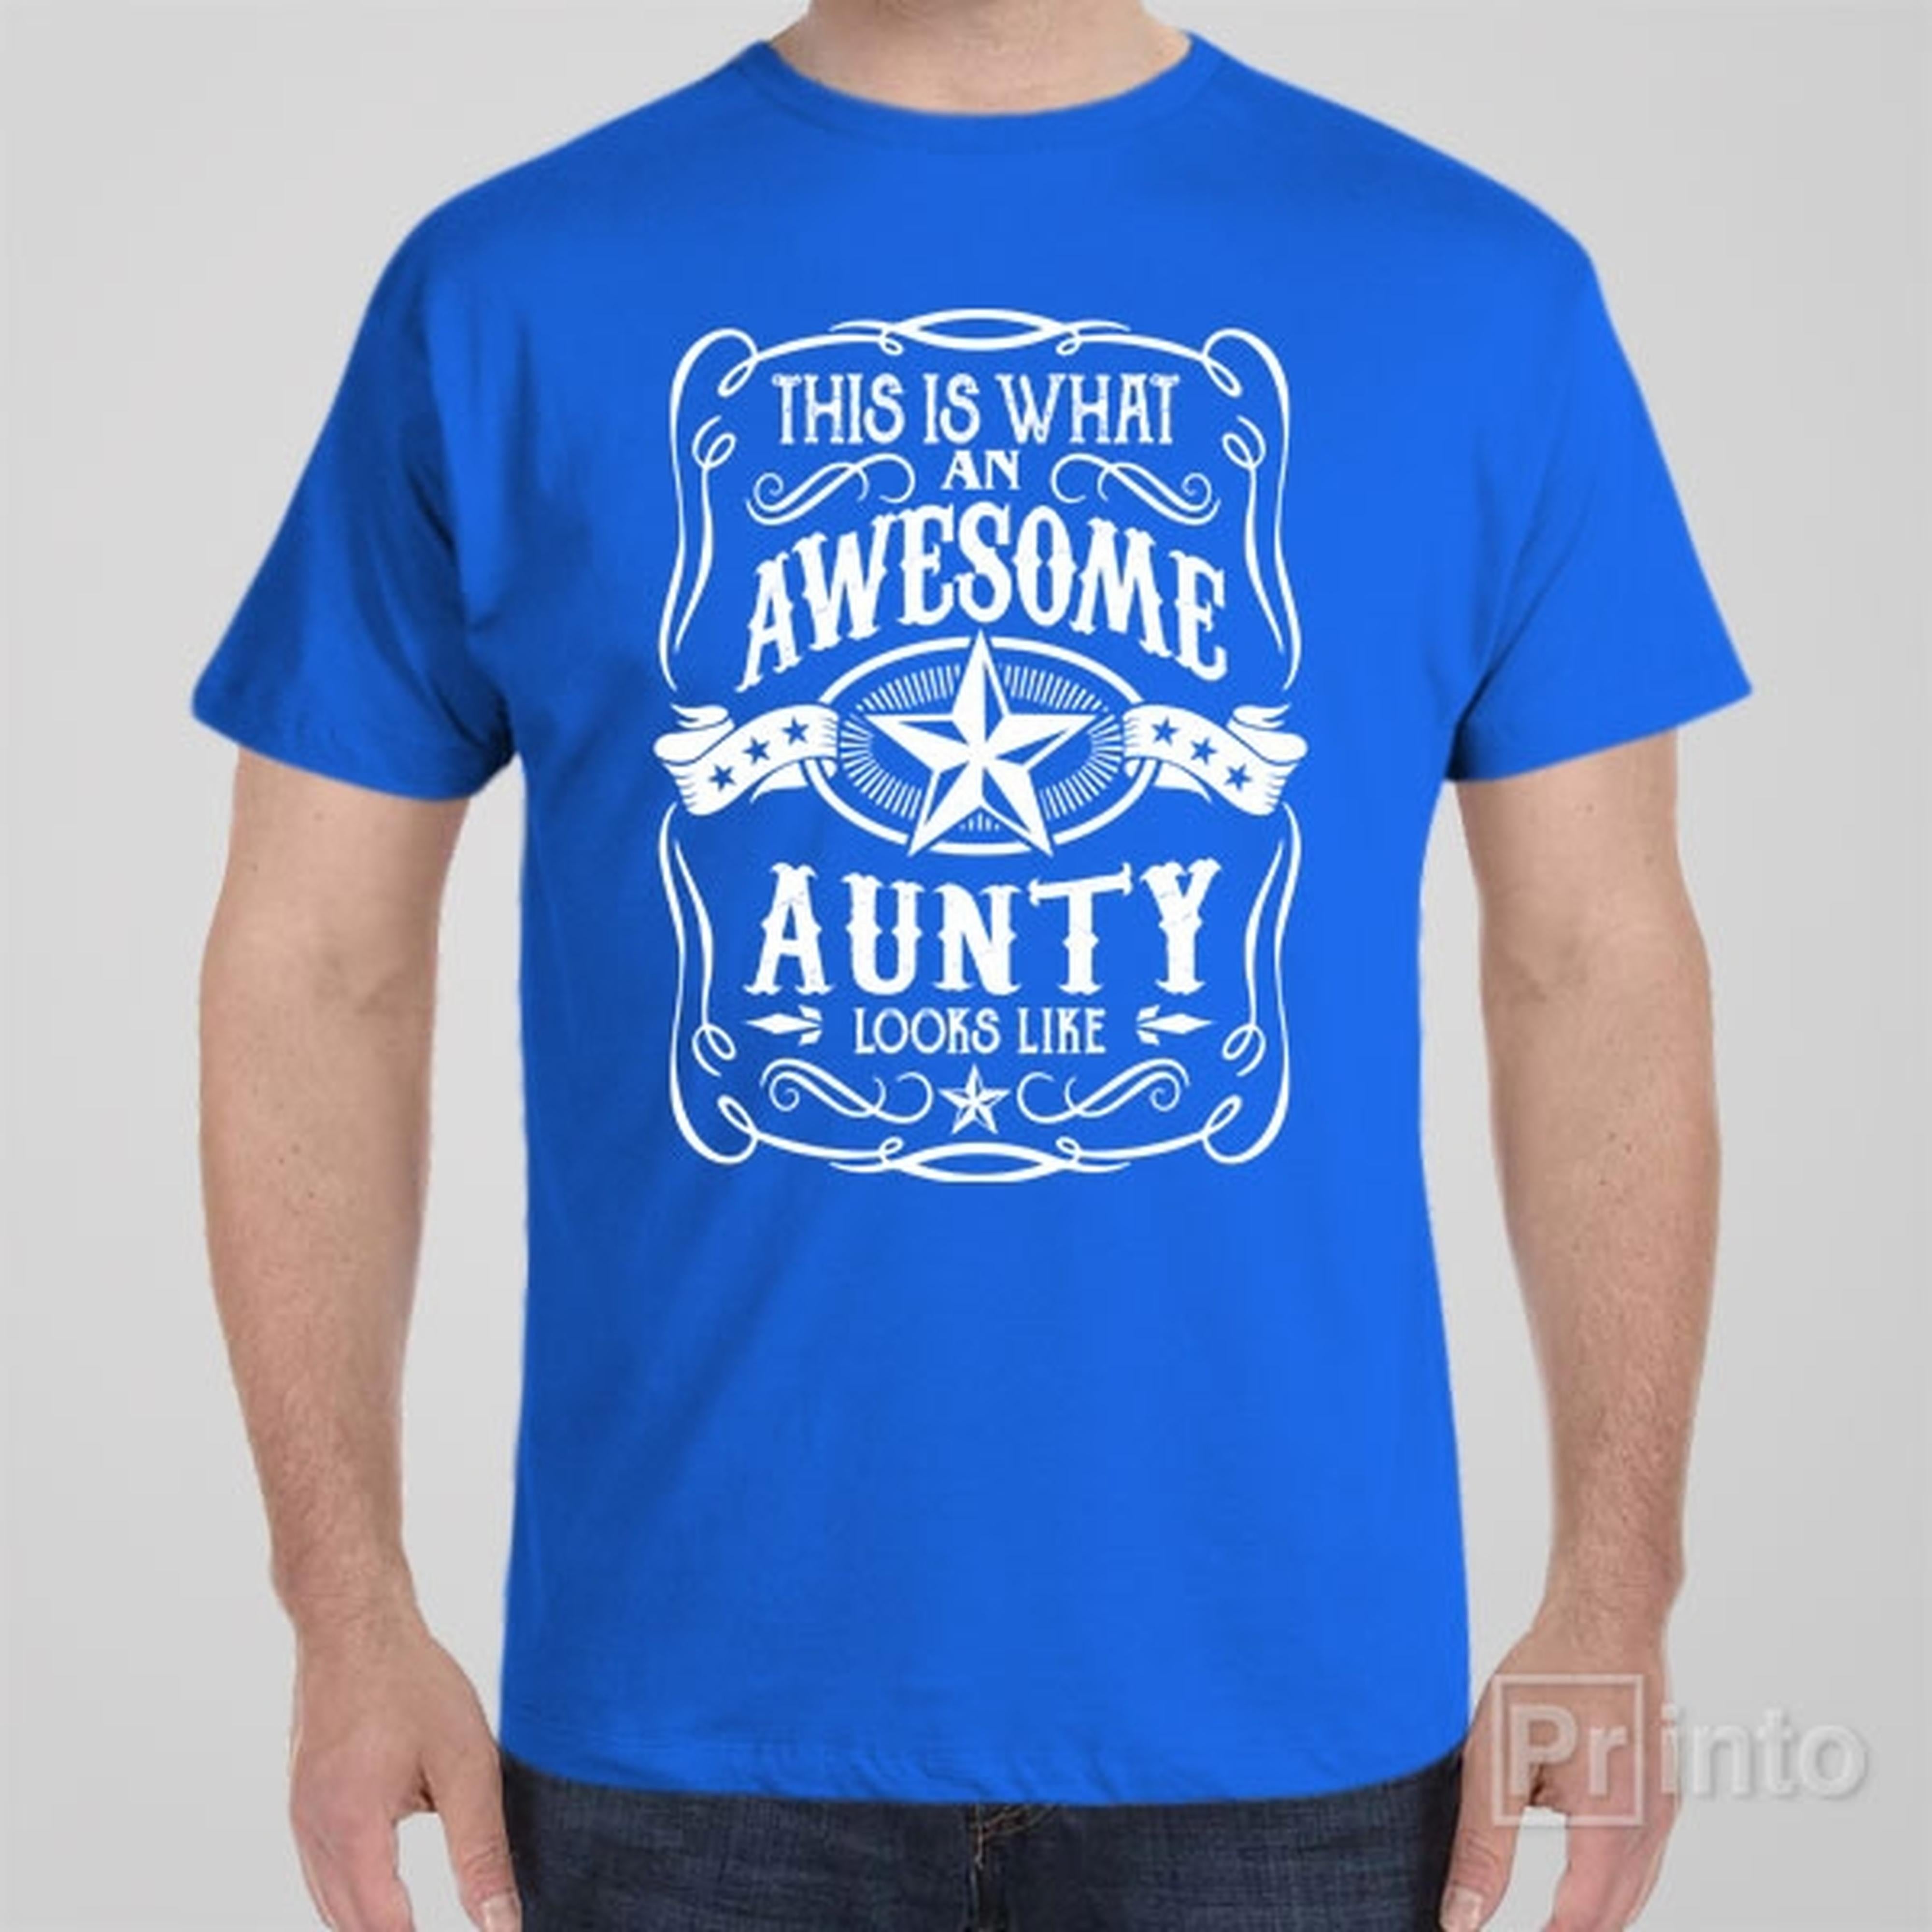 this-is-what-an-awesome-aunty-looks-like-t-shirt